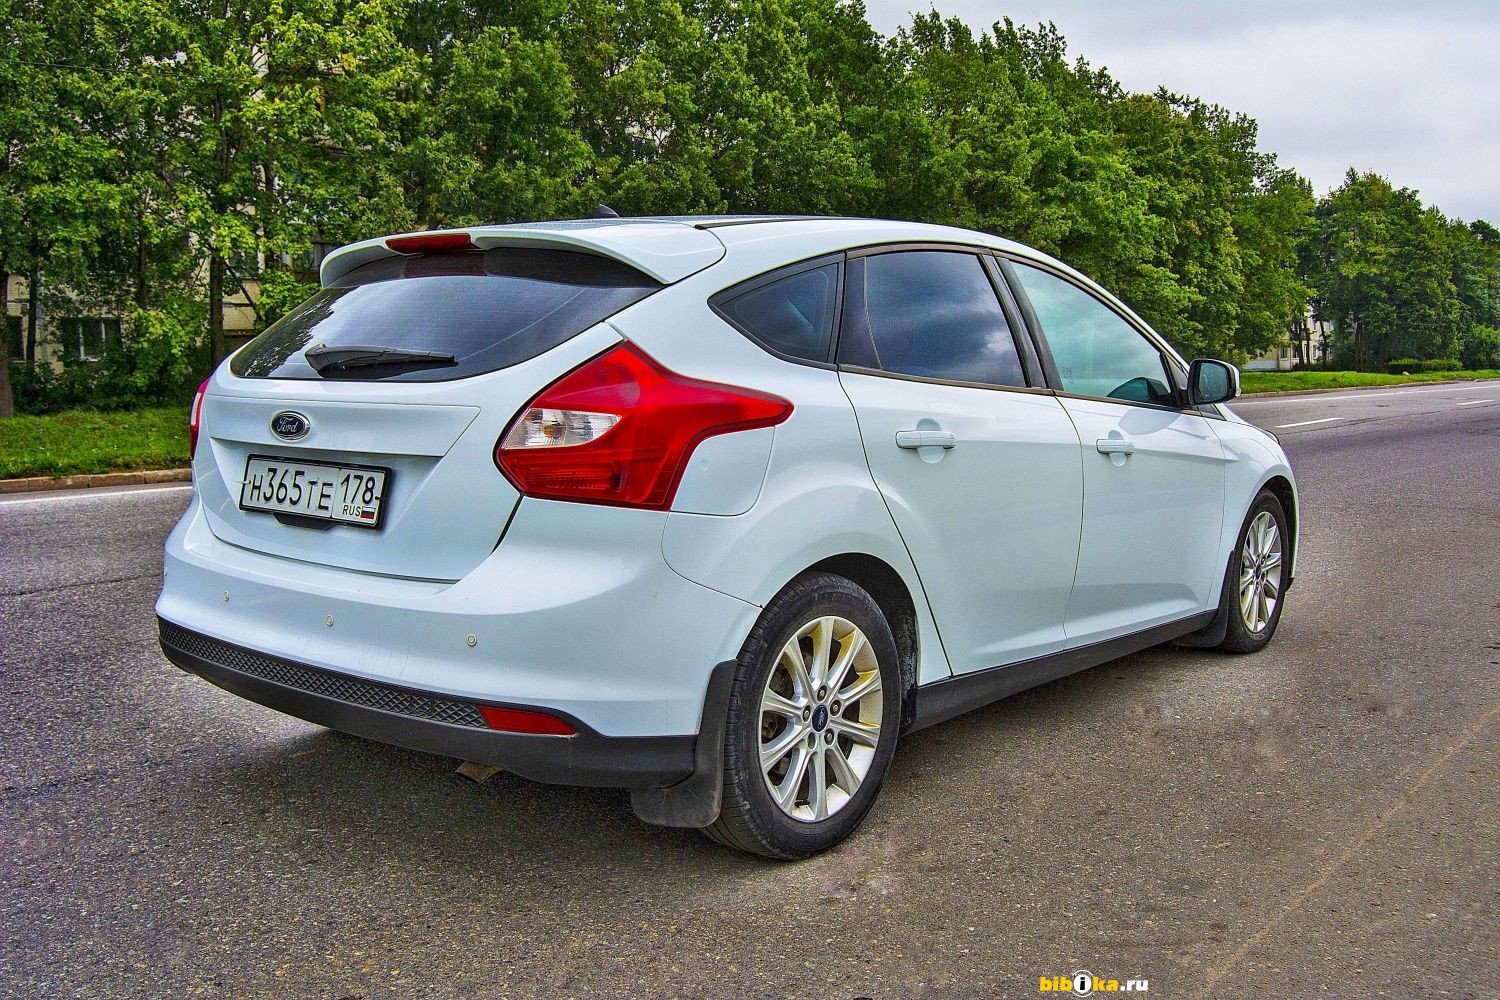 Форд фокус 125 лс. Ford Focus 2012. Ford Focus 3 2012. Ford Focus 3 2012 хэтчбек. Ford Focus, 2012 белый.